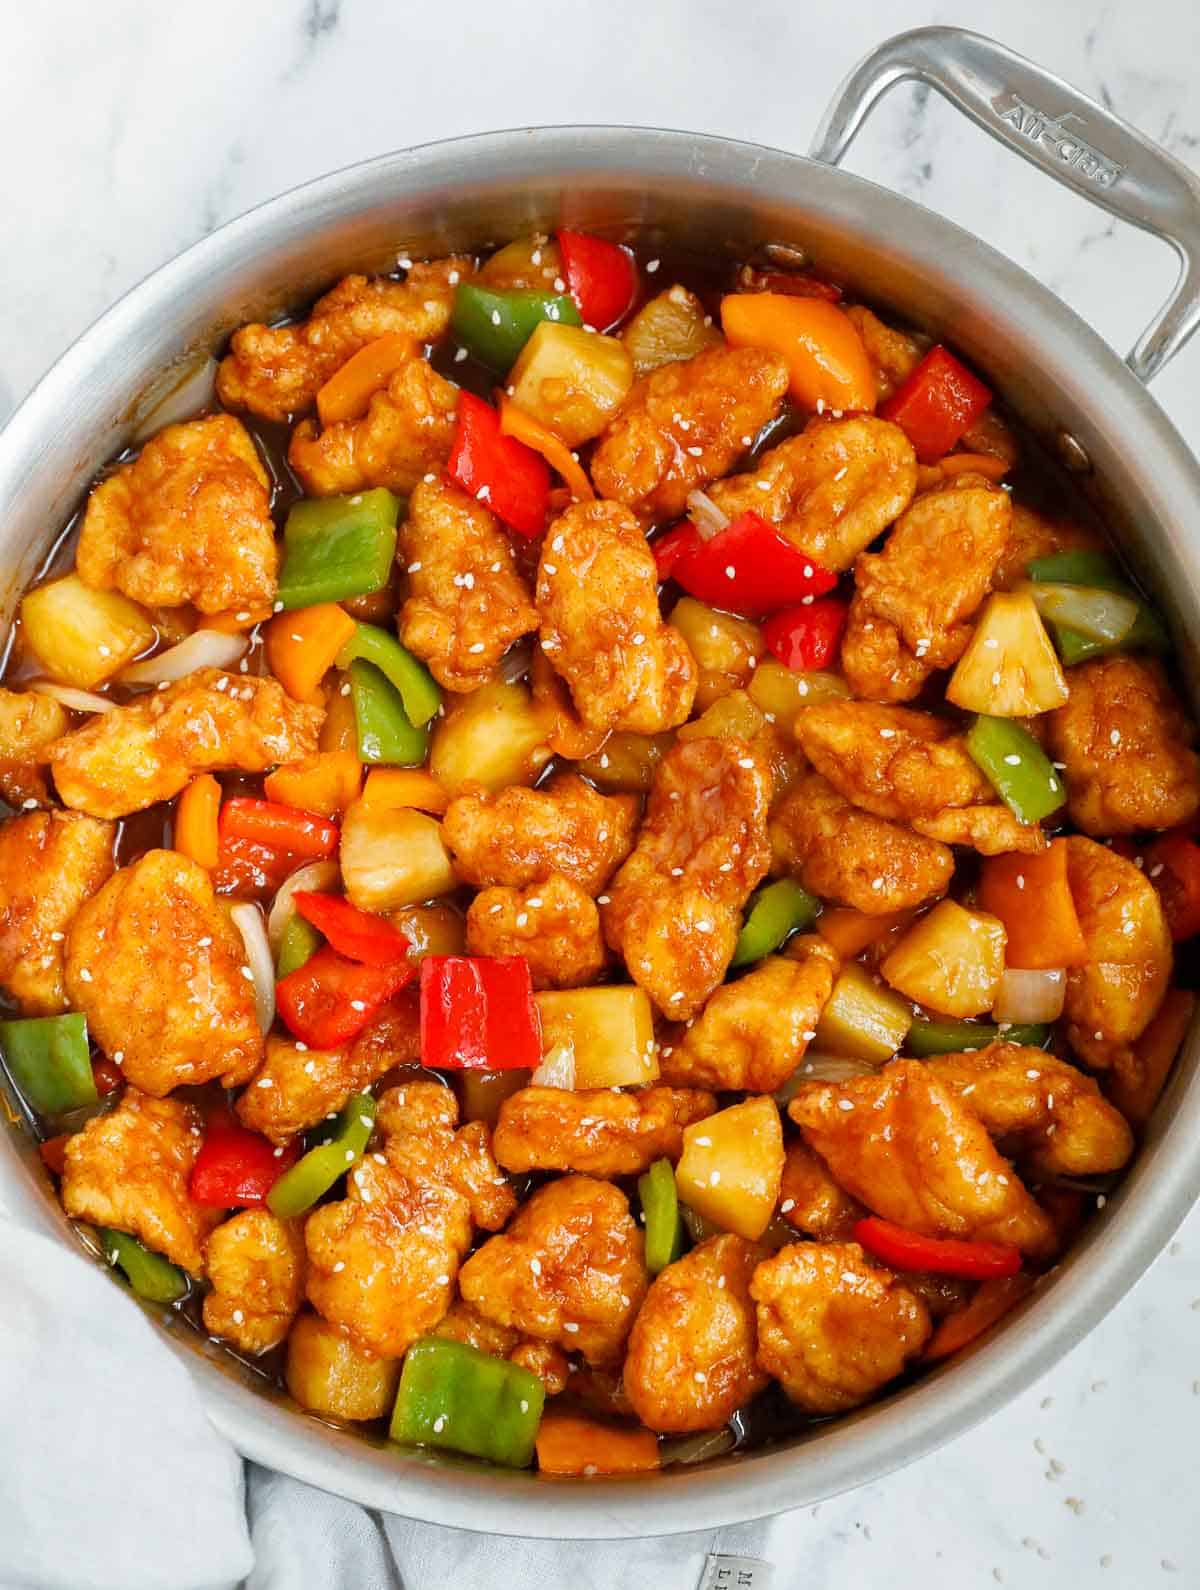 Chicken tossed with easy sweet and sour sauce in a skillet.